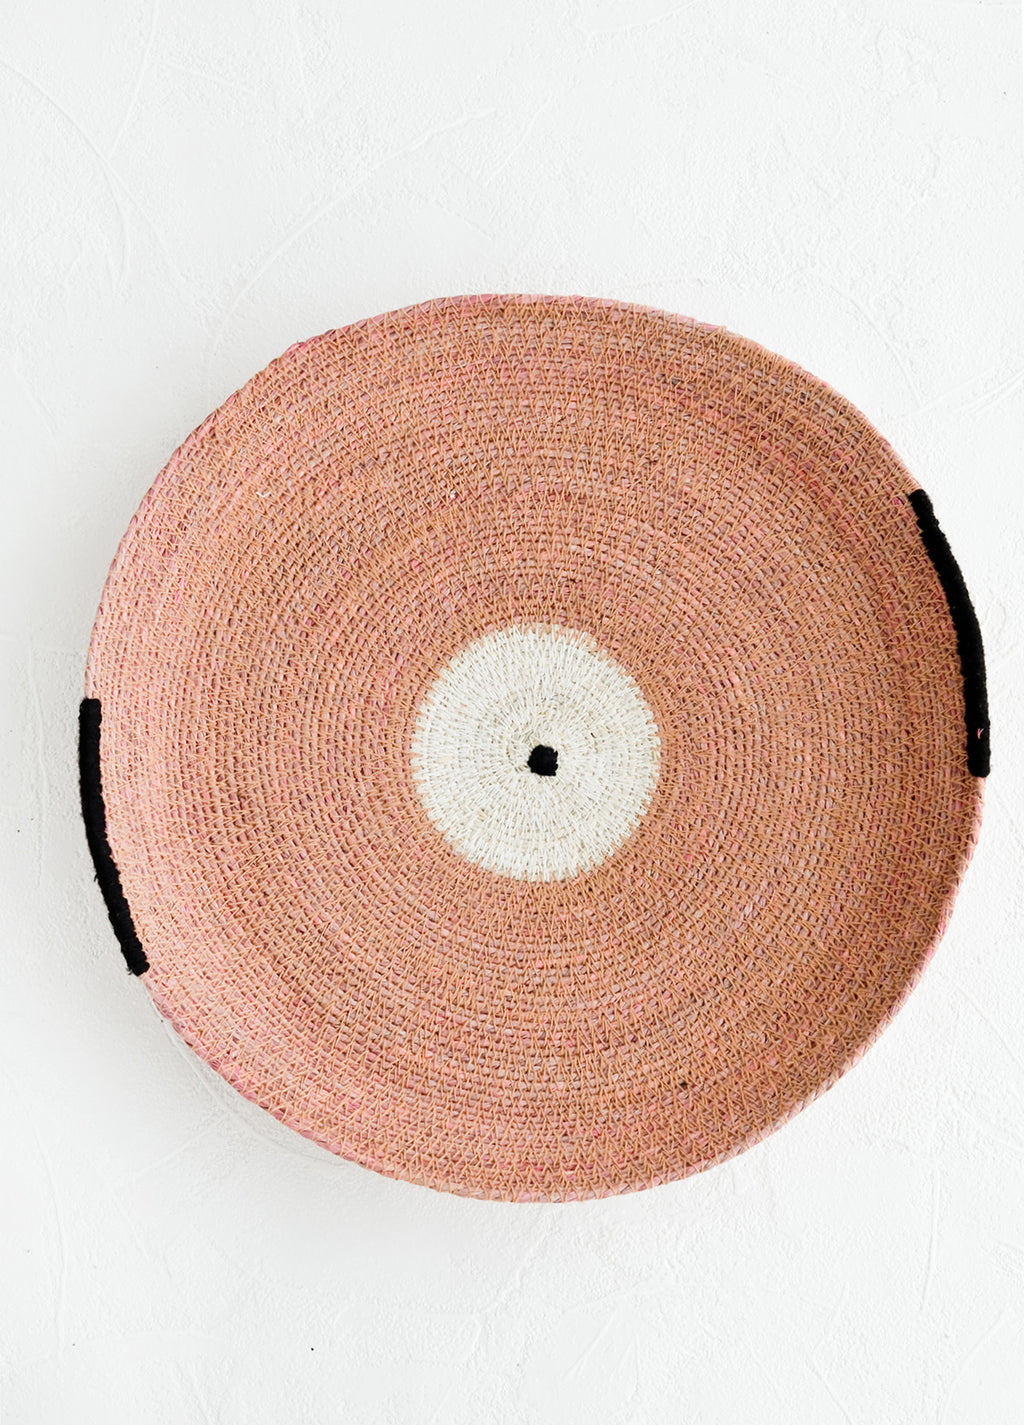 Rose: A round platter/tray made from woven seagrass in pink, white and black.